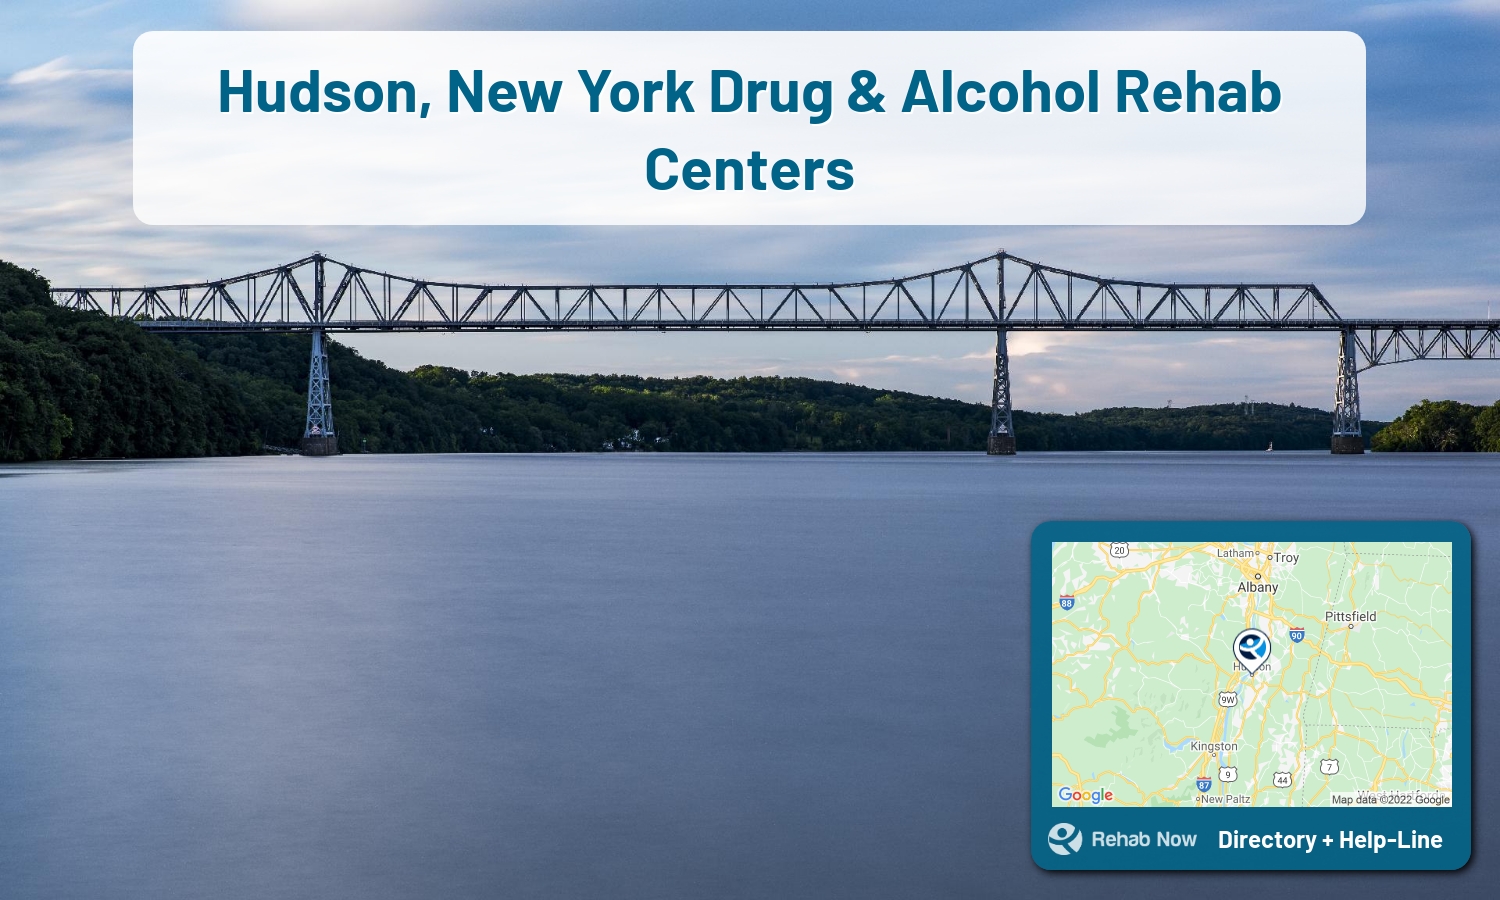 View options, availability, treatment methods, and more, for drug rehab and alcohol treatment in Hudson, New York